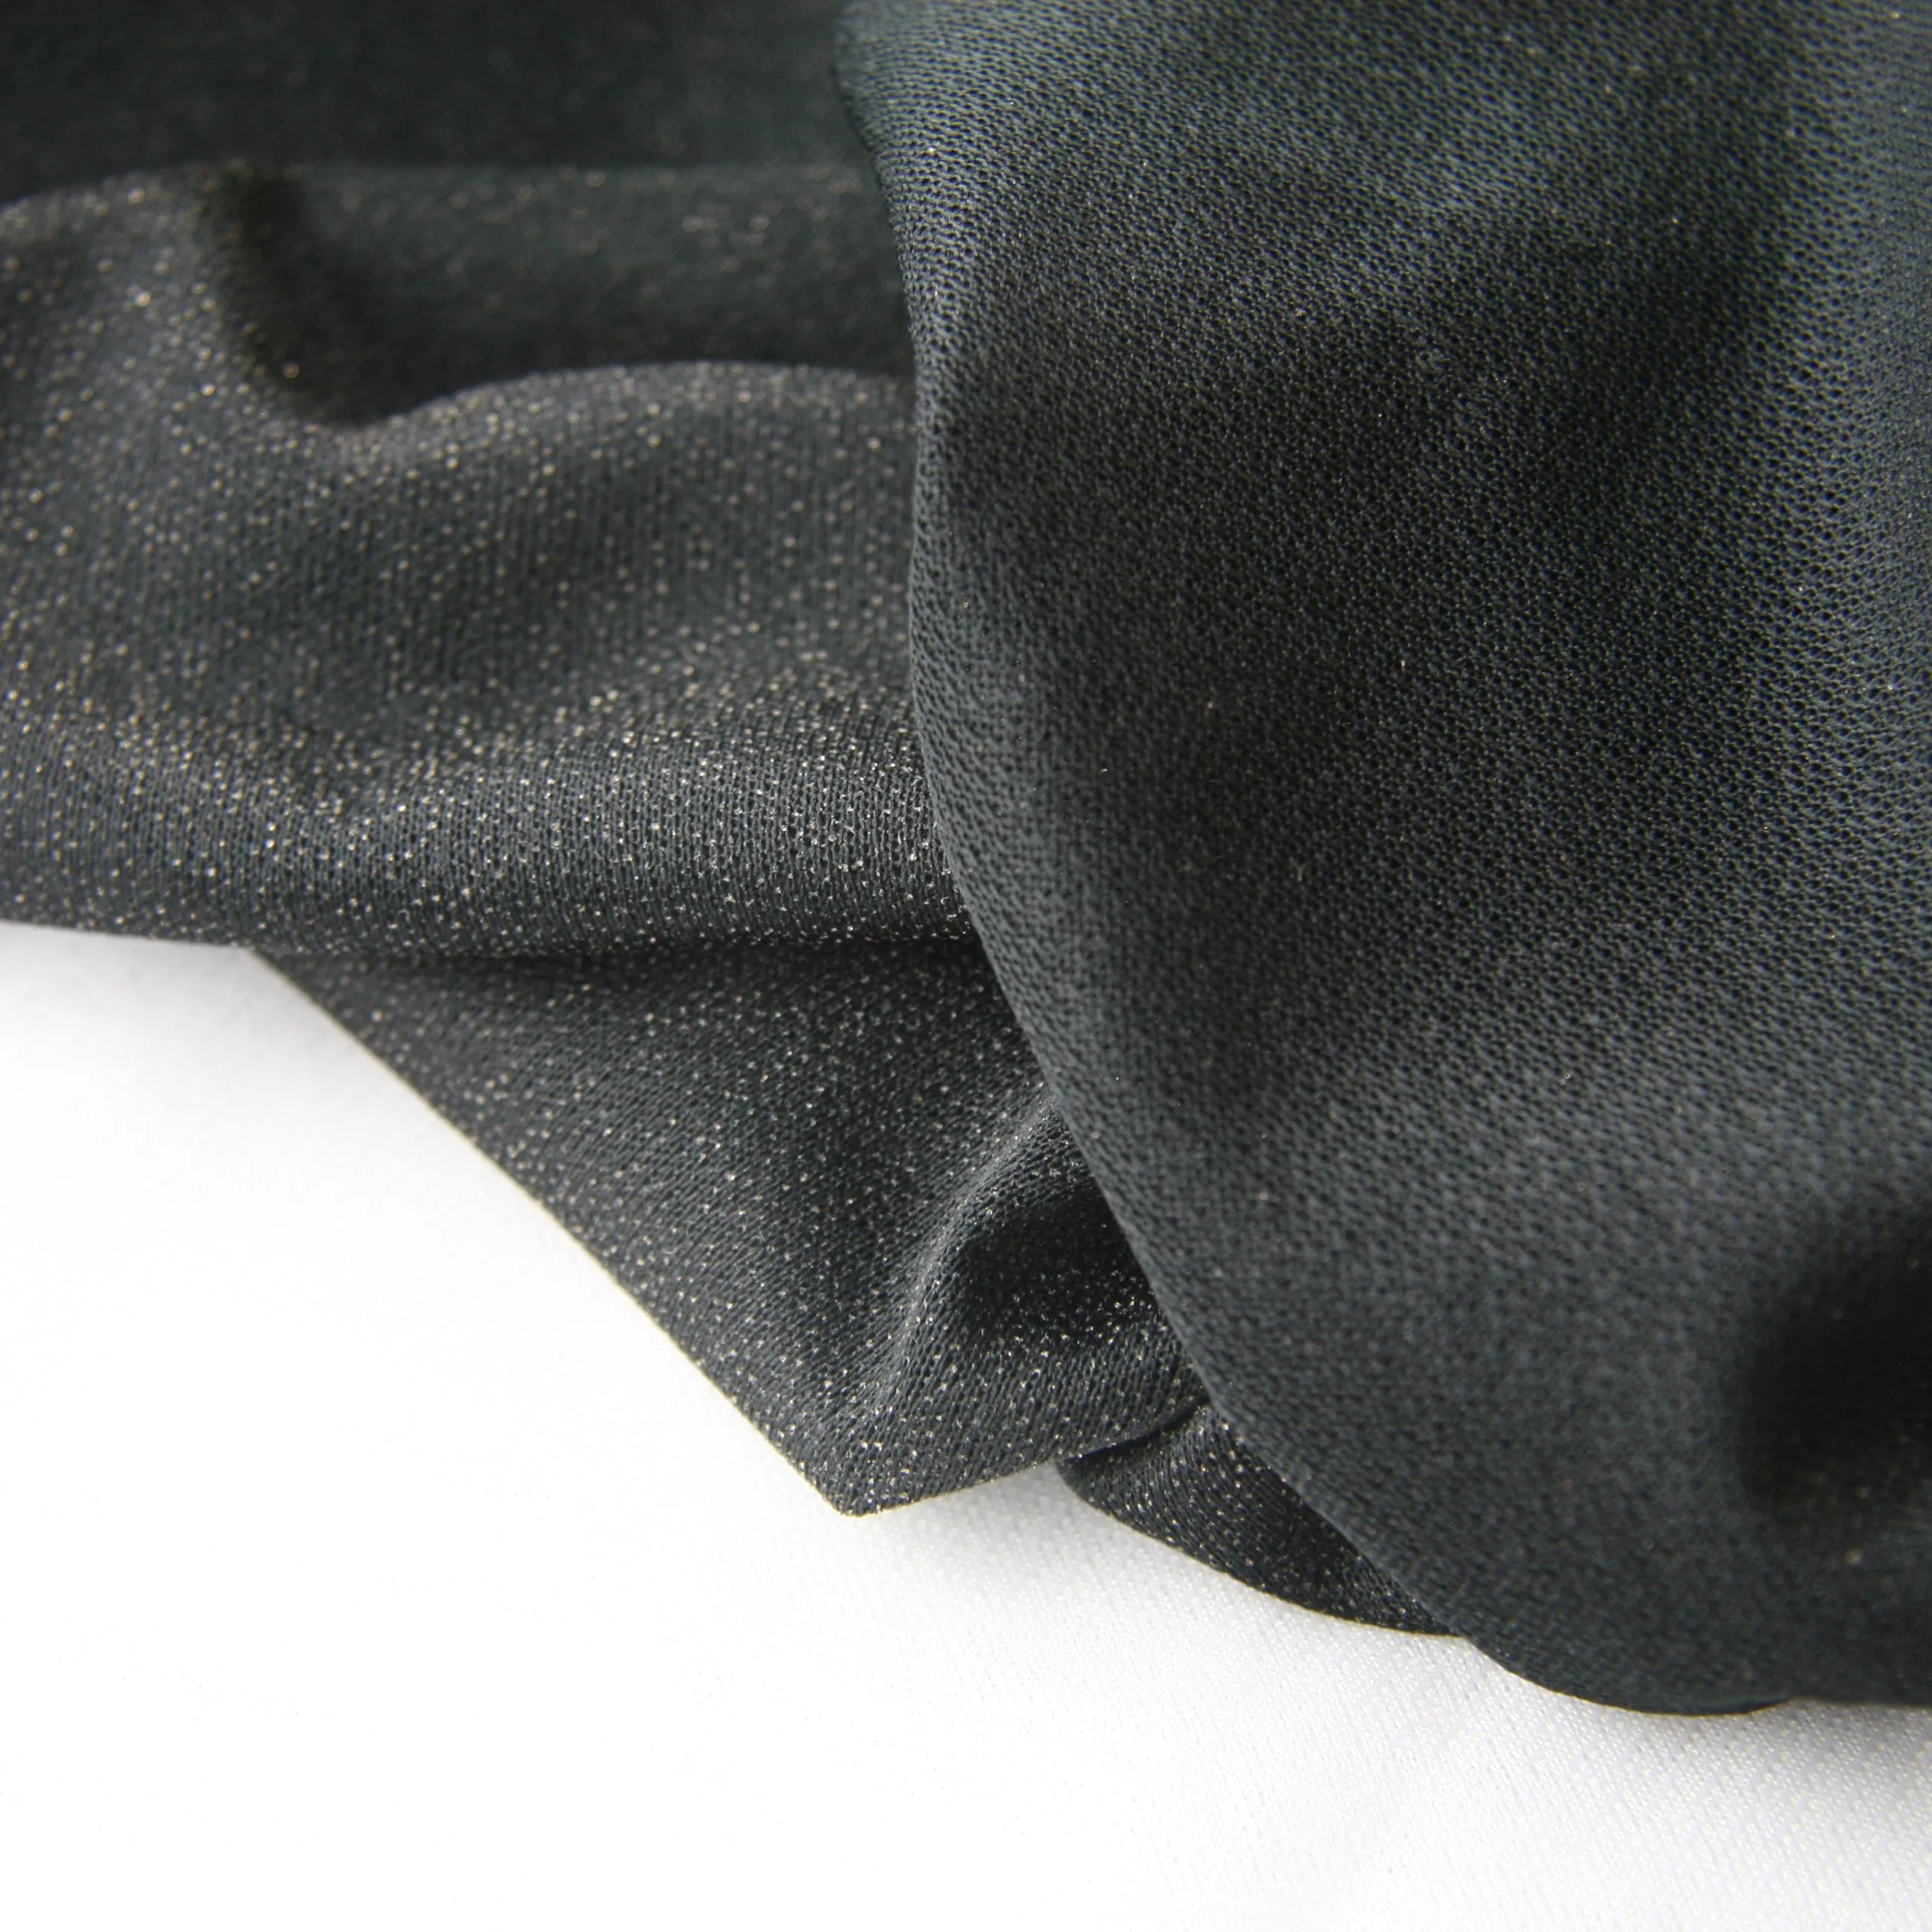 Black White Woven Fusing Interlining Fabric Fusible Interfacing Fabric For Garment